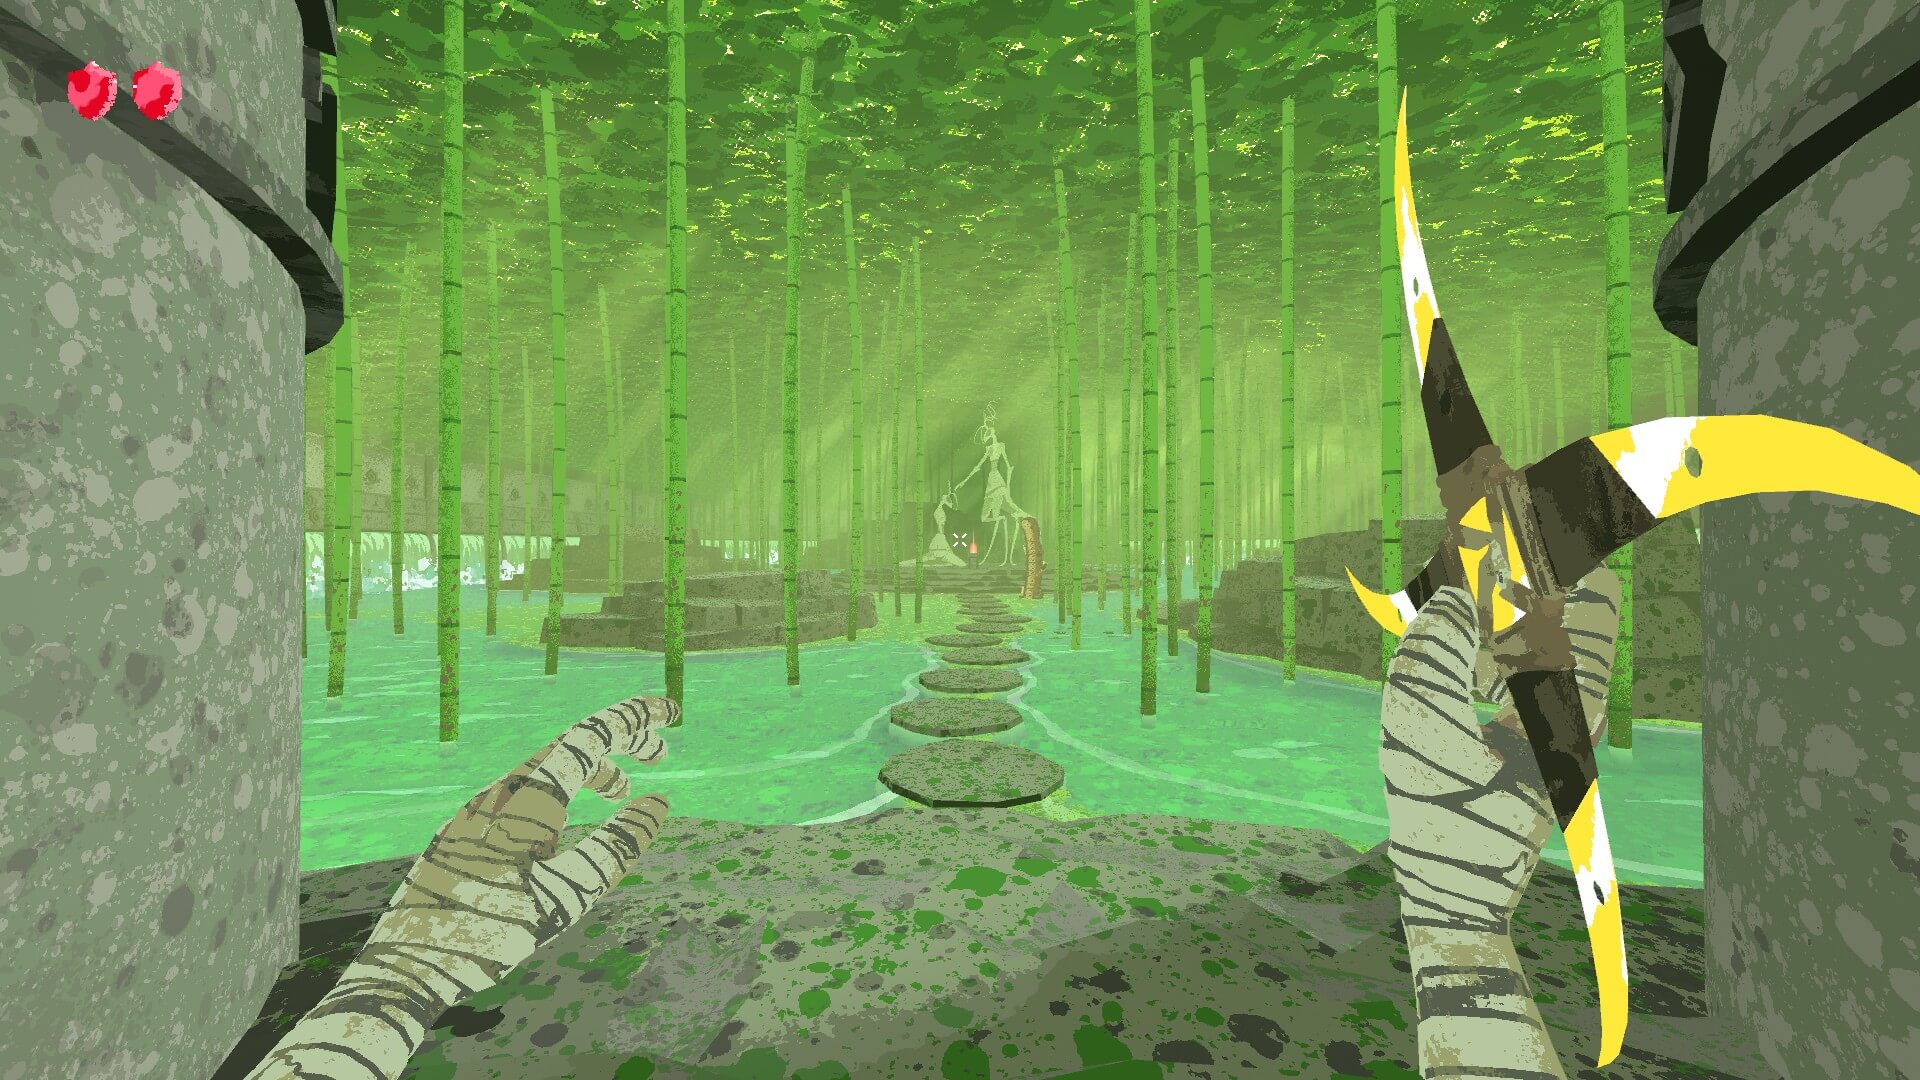 The hero walking through a bamboo forest with a shrine in the middle